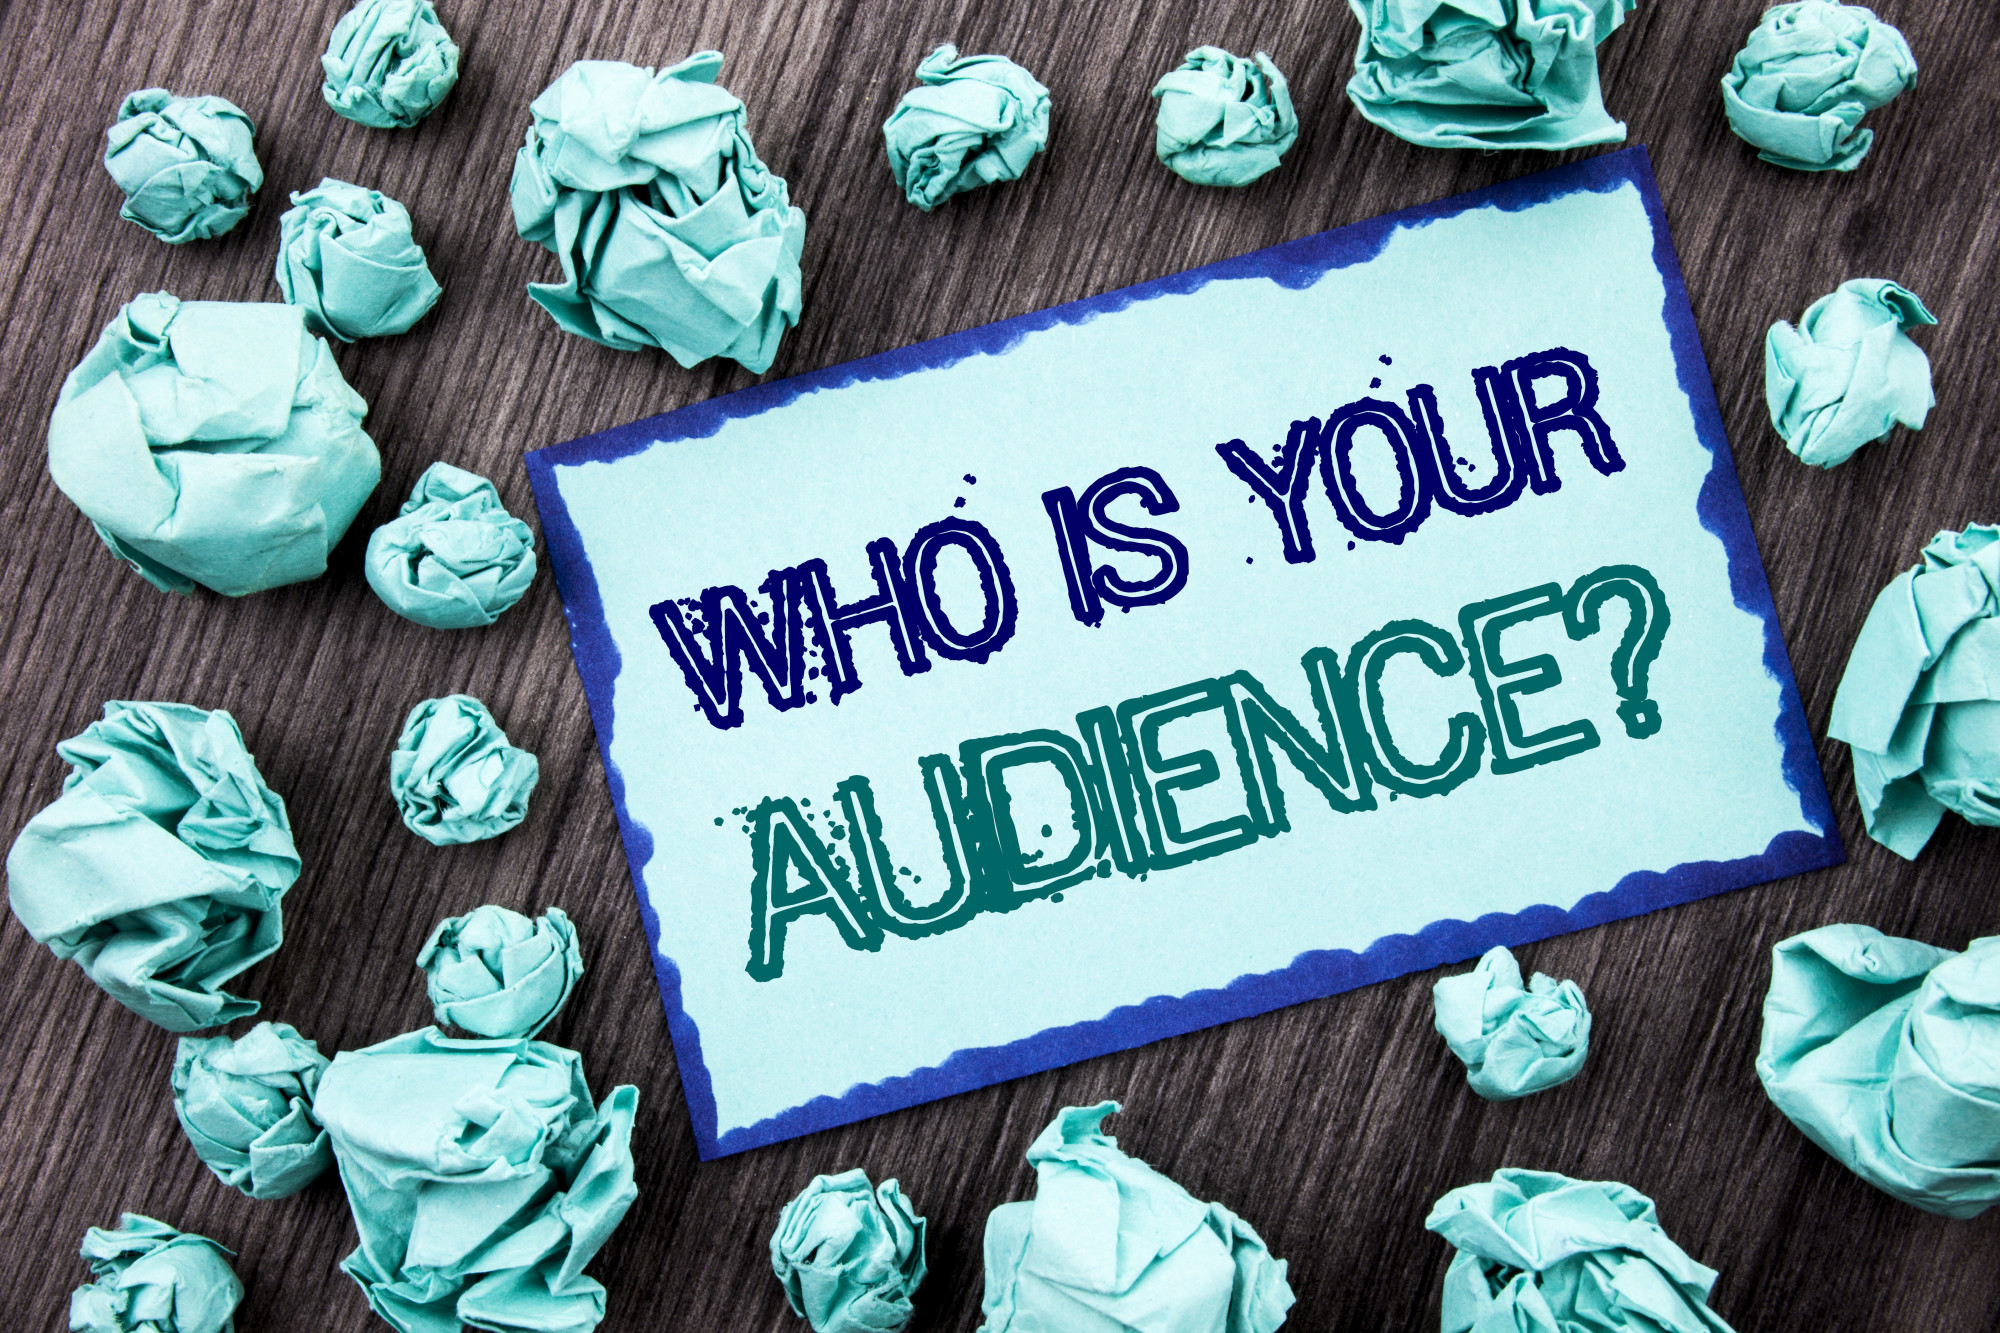 business marketing strategies: who is your audience